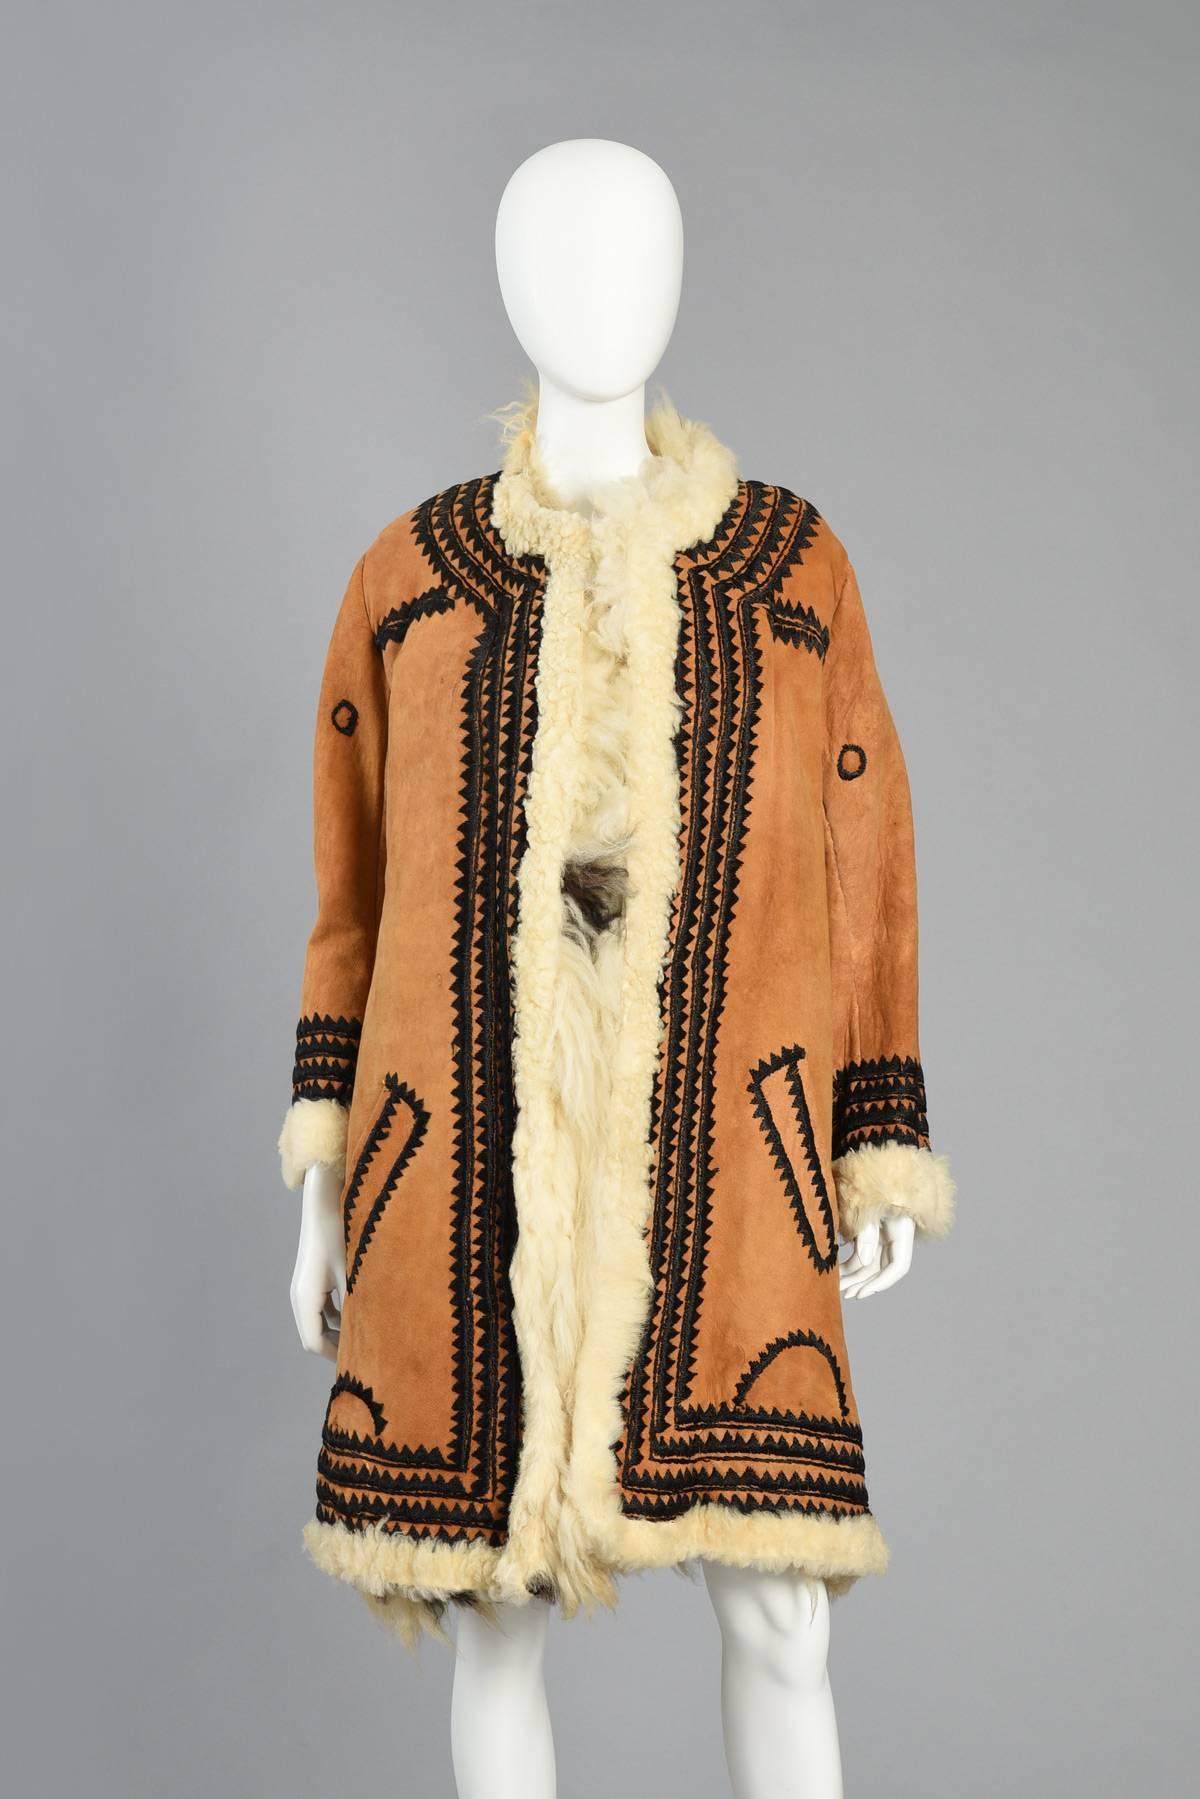 Incredible 1970s Embroidered Shearling + Suede Coat 1